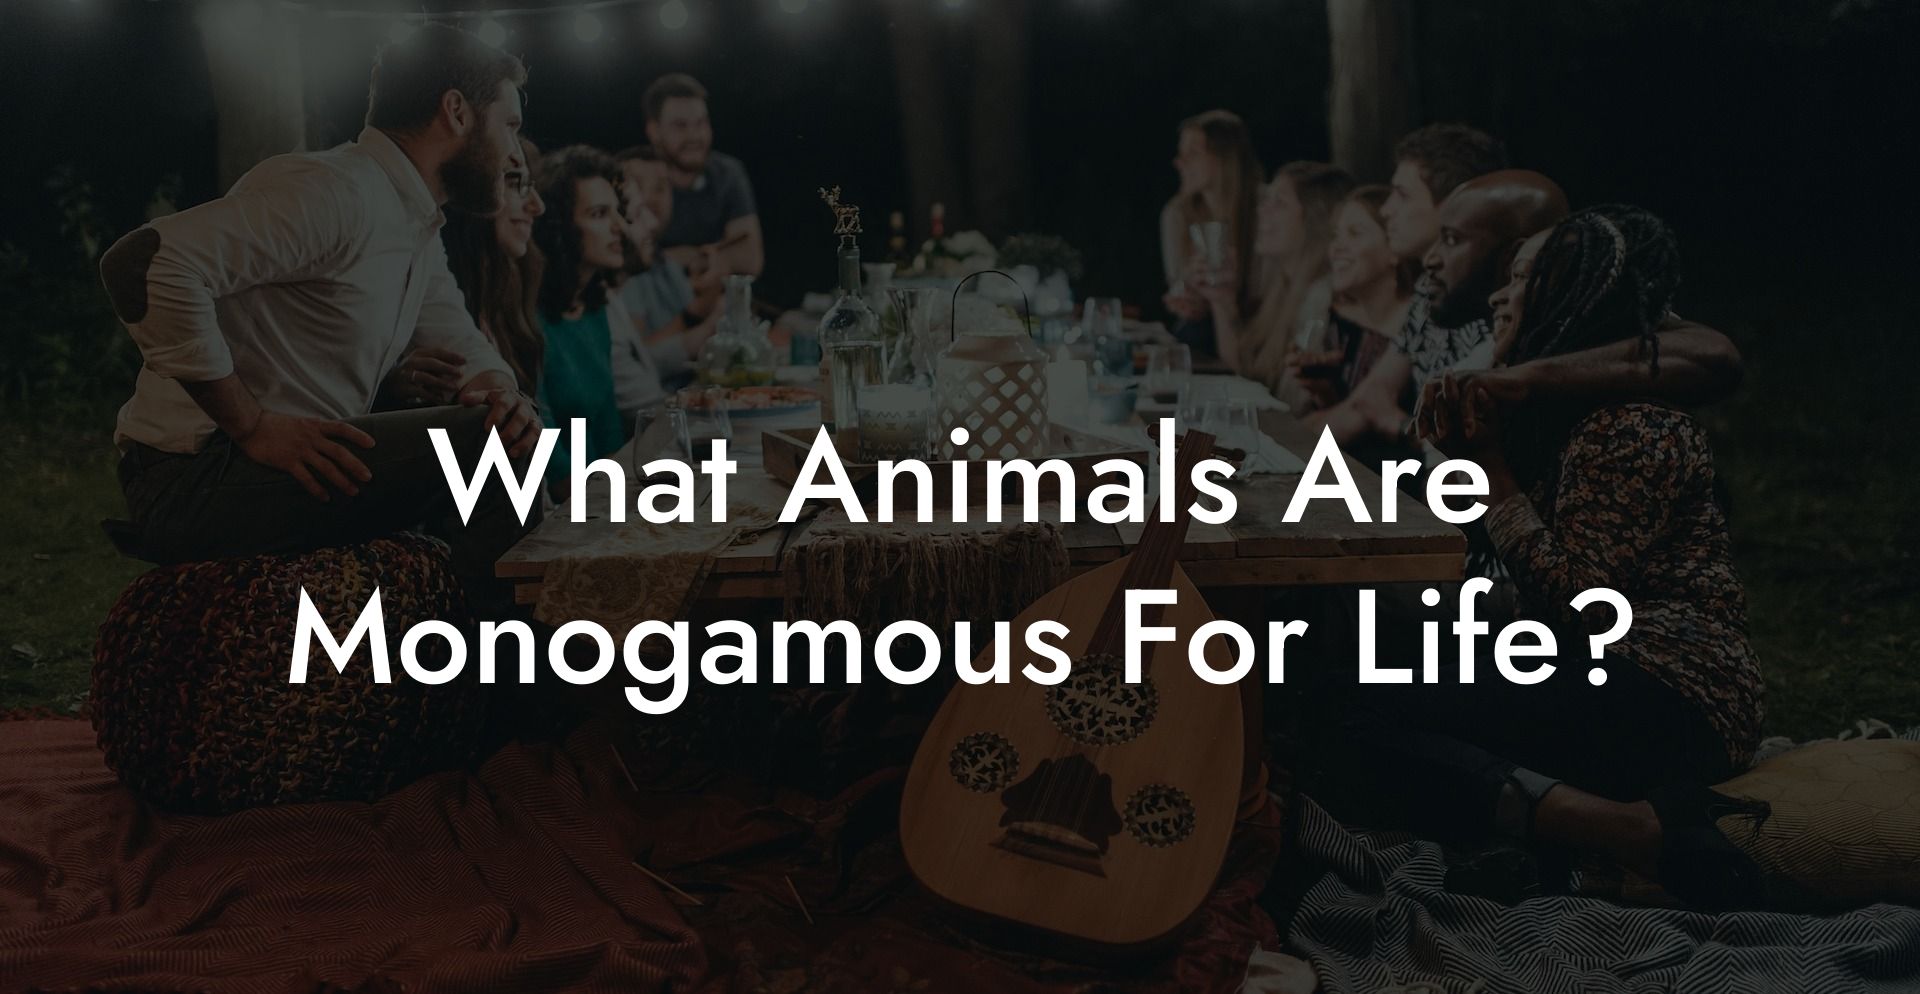 What Animals Are Monogamous For Life?